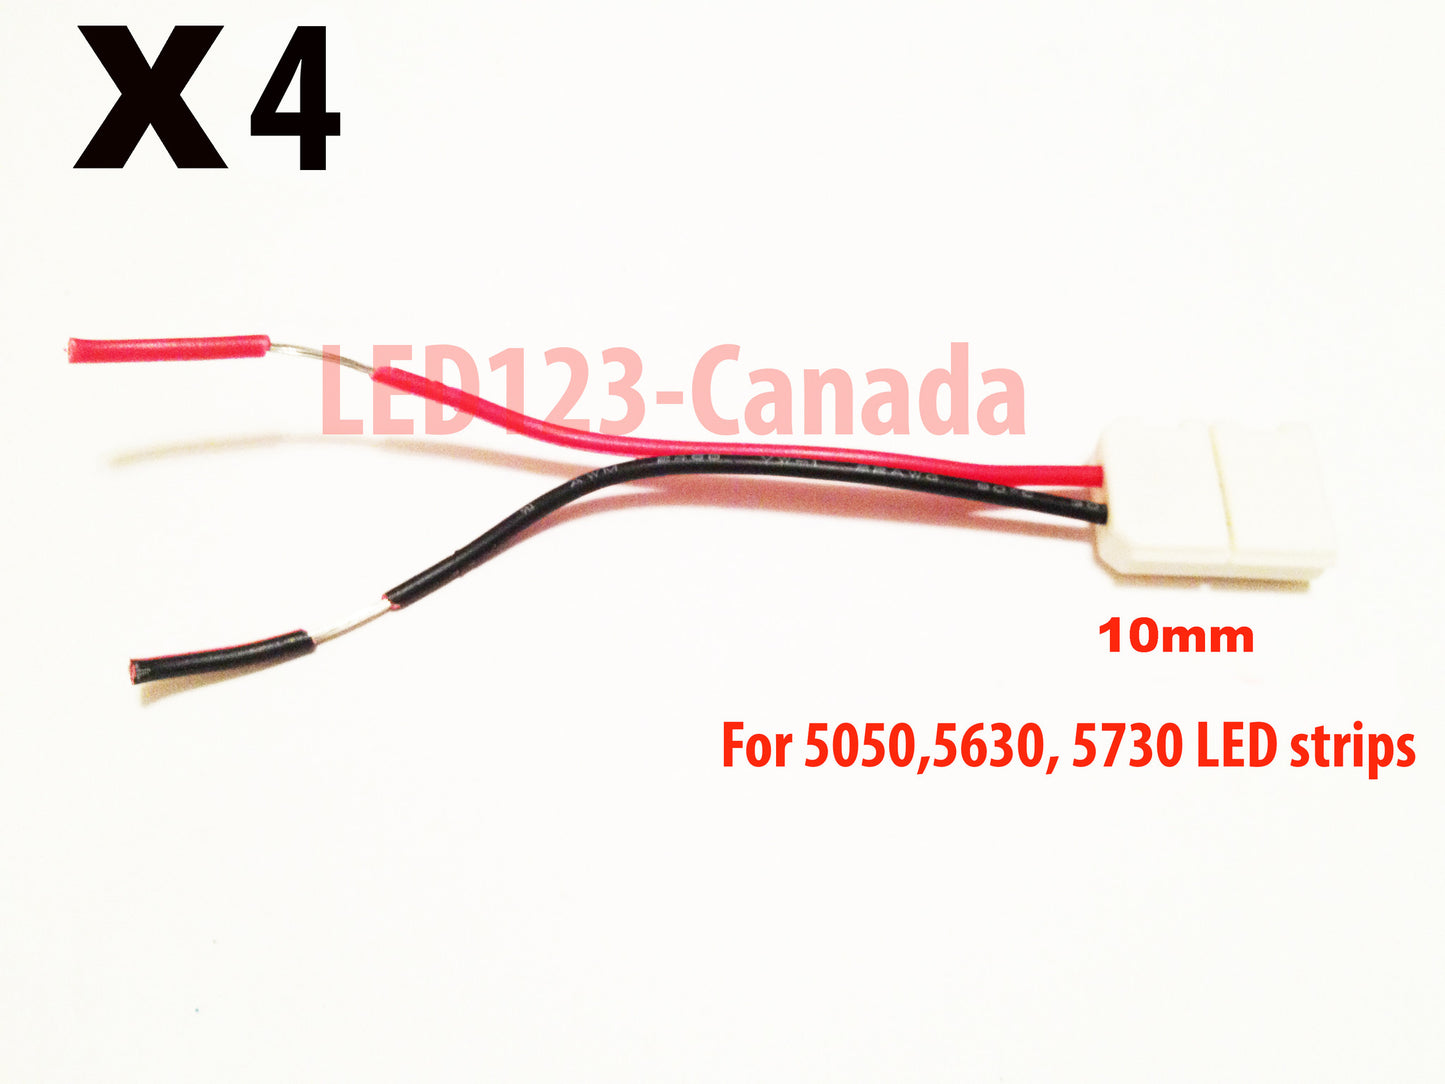 LED to wire connector for SINGLE COLOR 5050,5630,5730 10mm/solderless